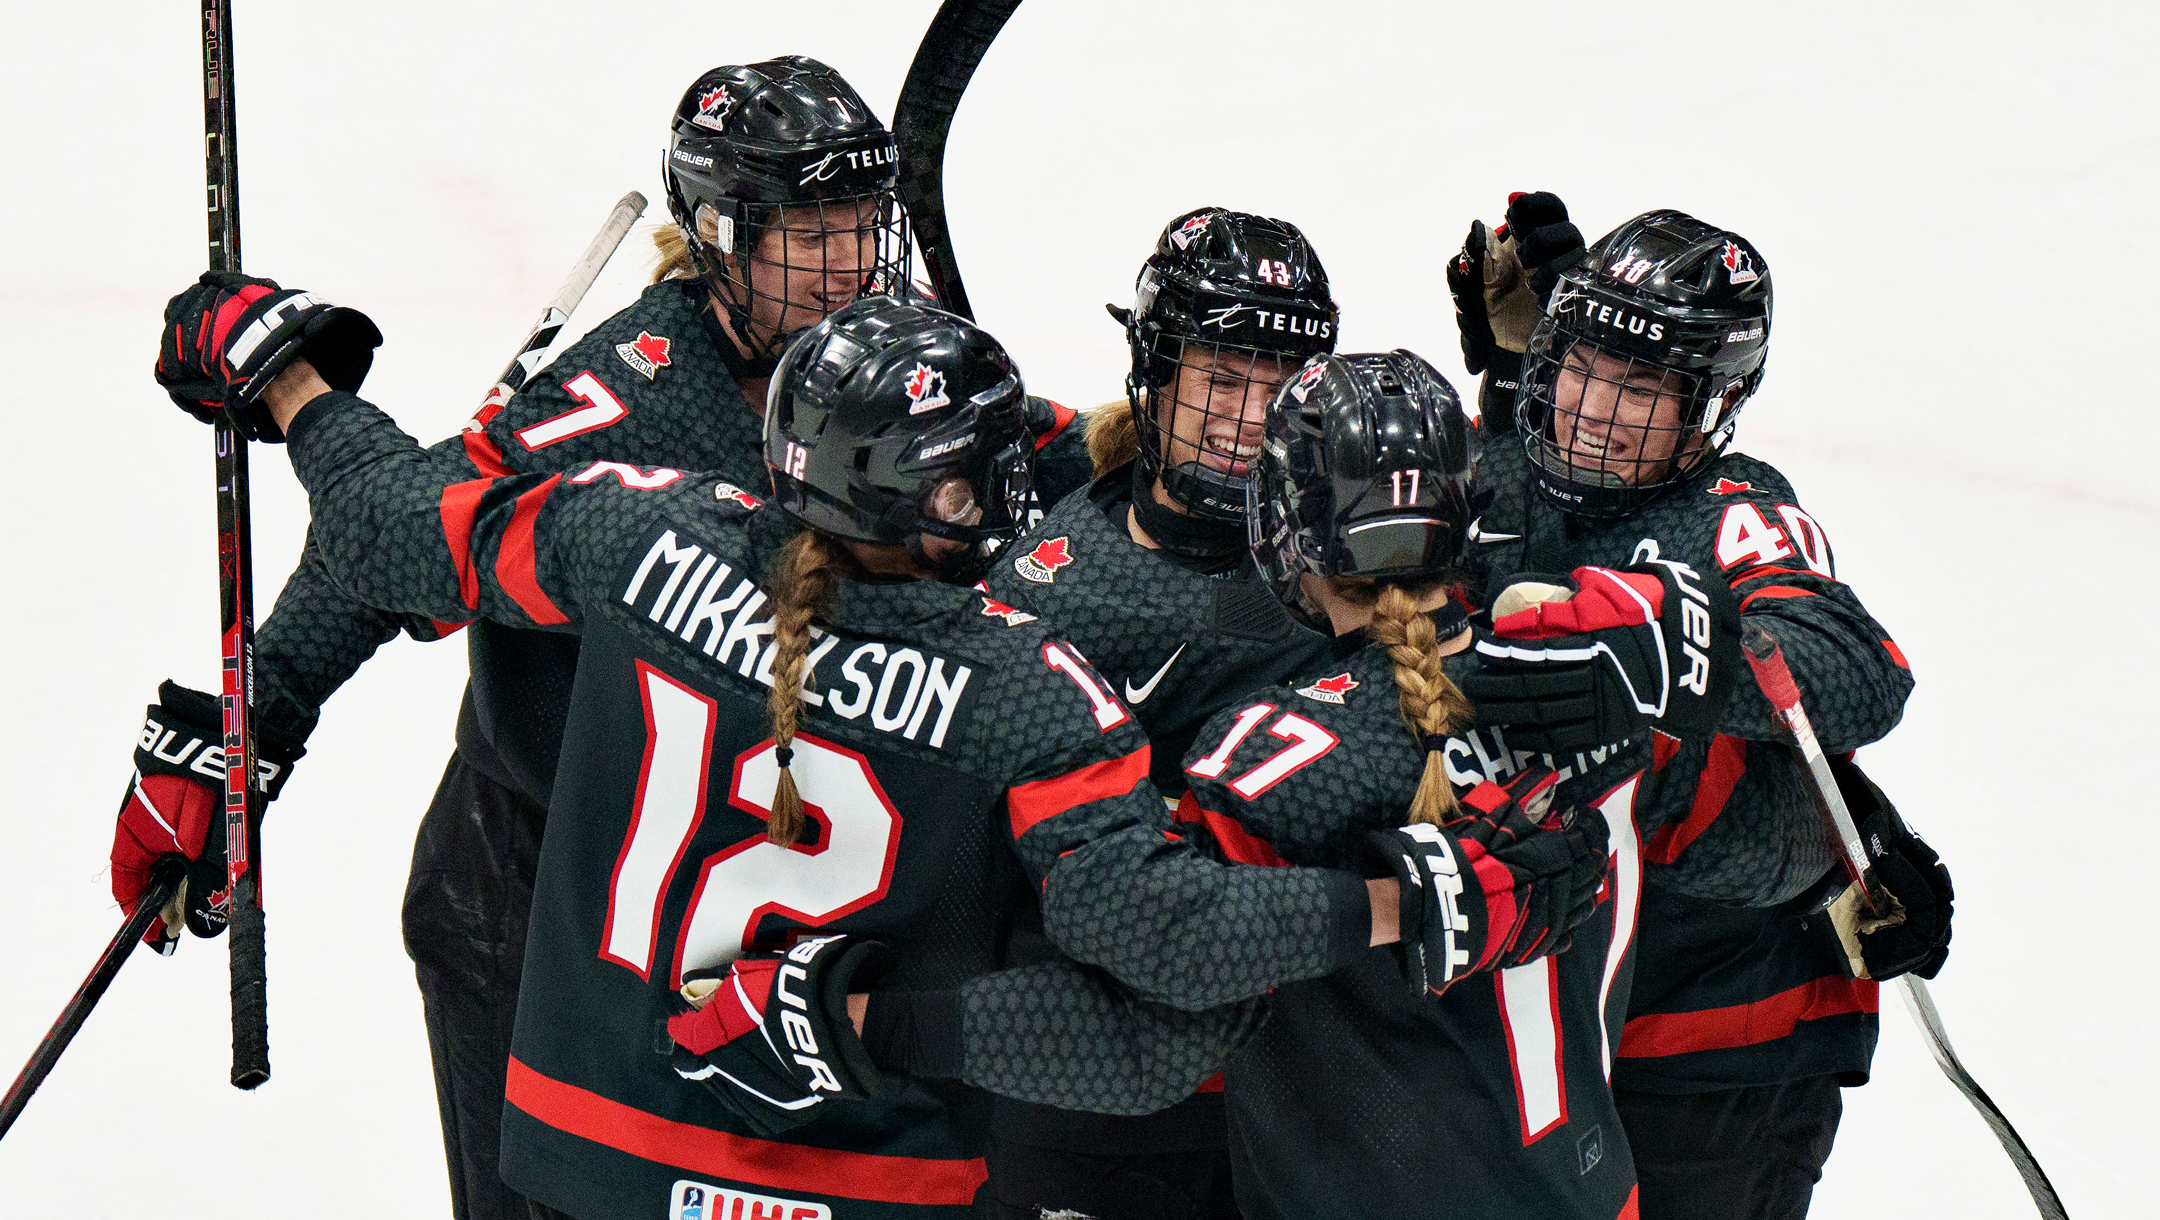 Team Canada to play for gold at women's hockey worlds - Team